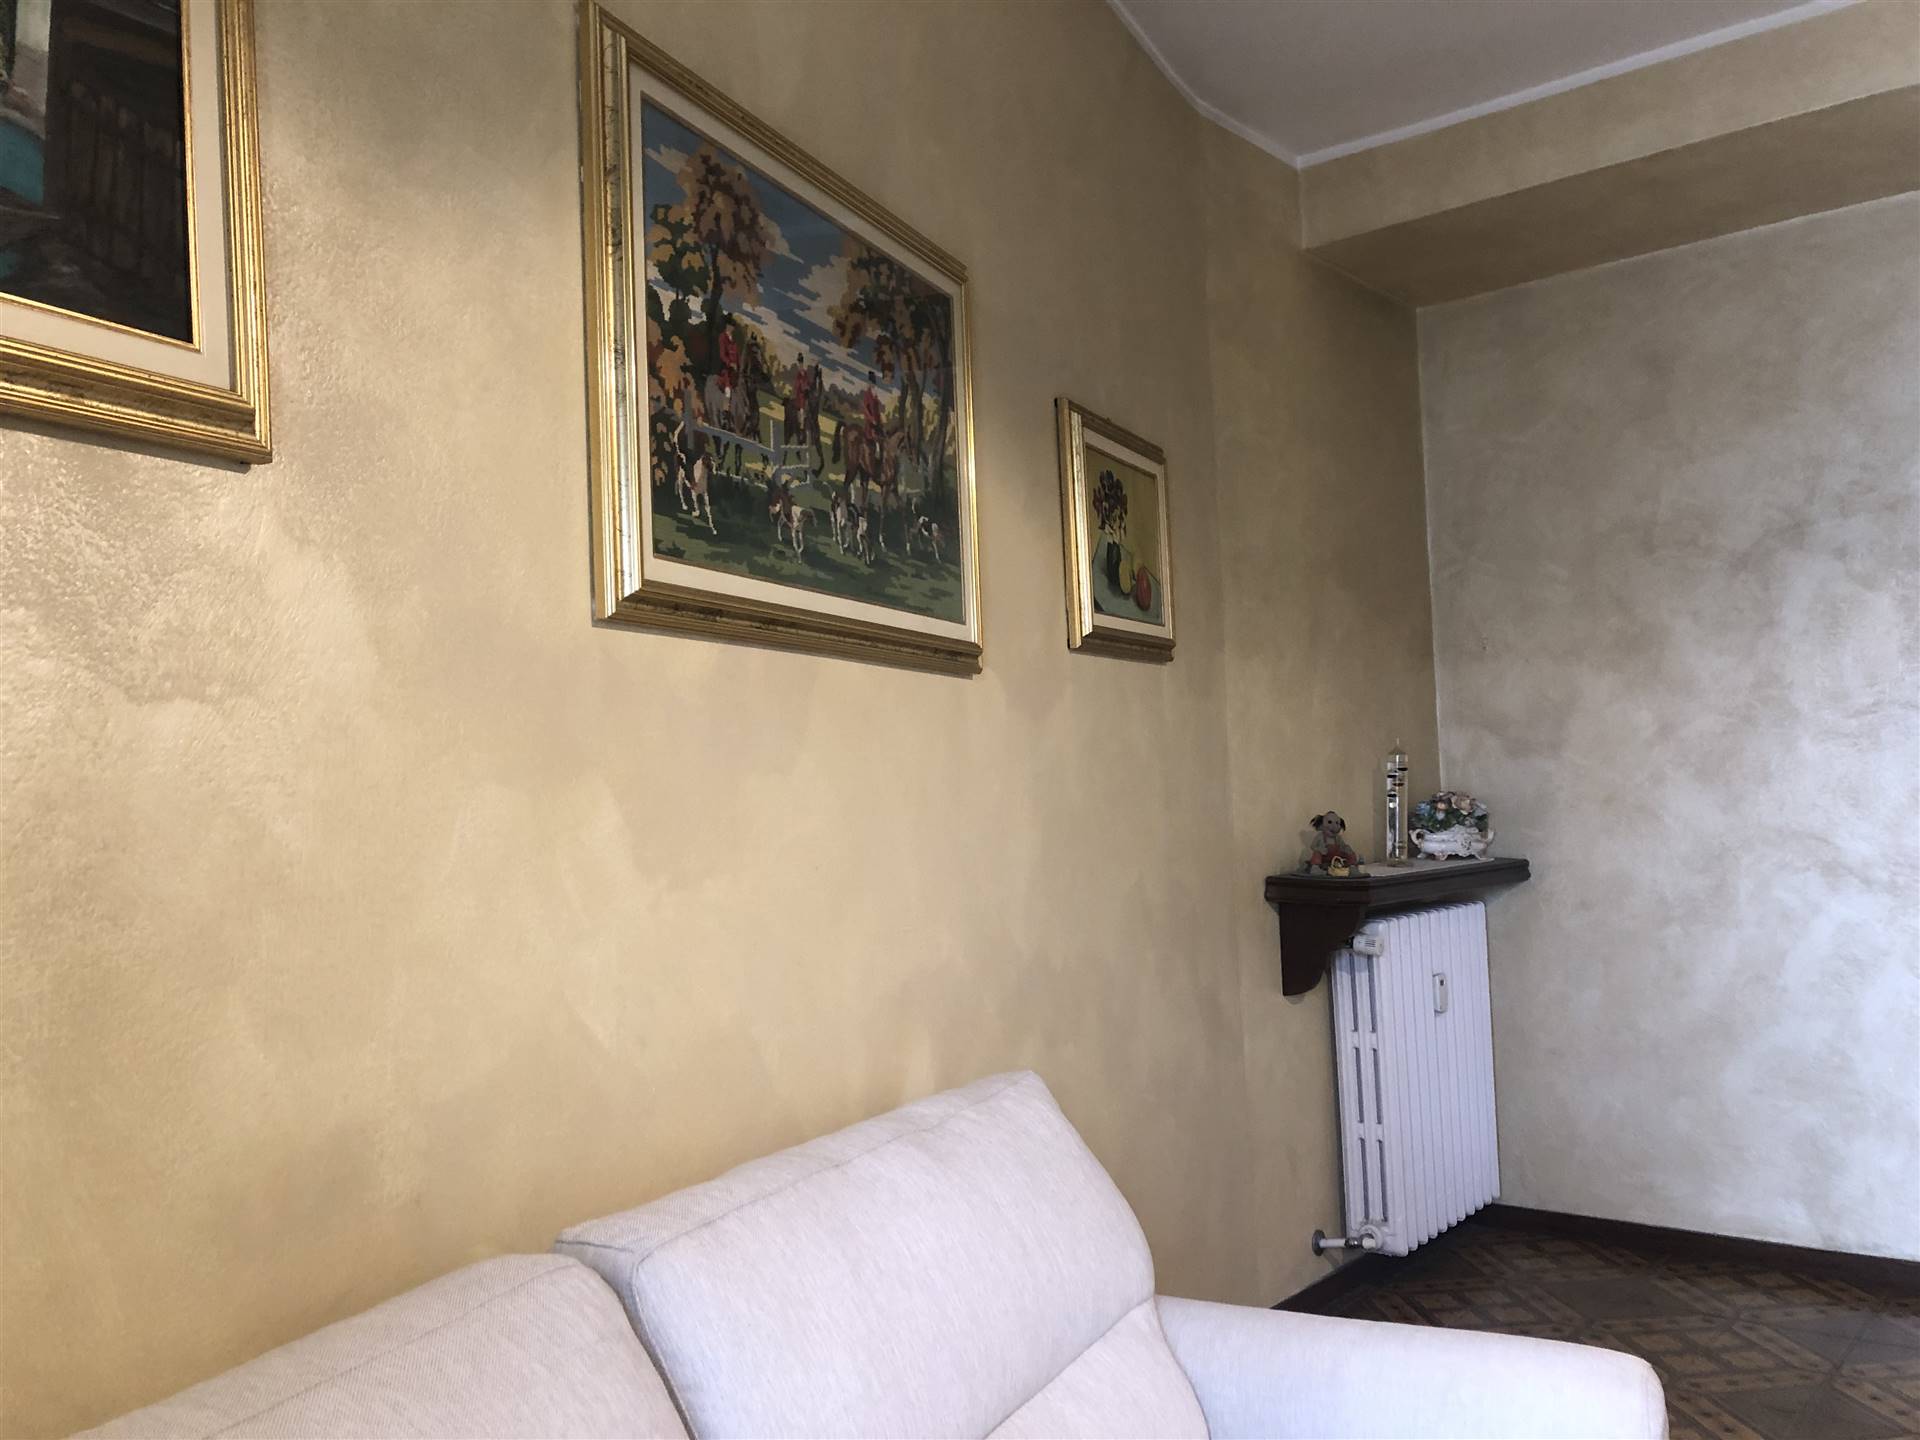 URGNANO, Apartment for sale of 80 Sq. mt., Good condition, Heating Centralized, placed at 2° on 3, composed by: 3 Rooms, Separate kitchen, , 2 